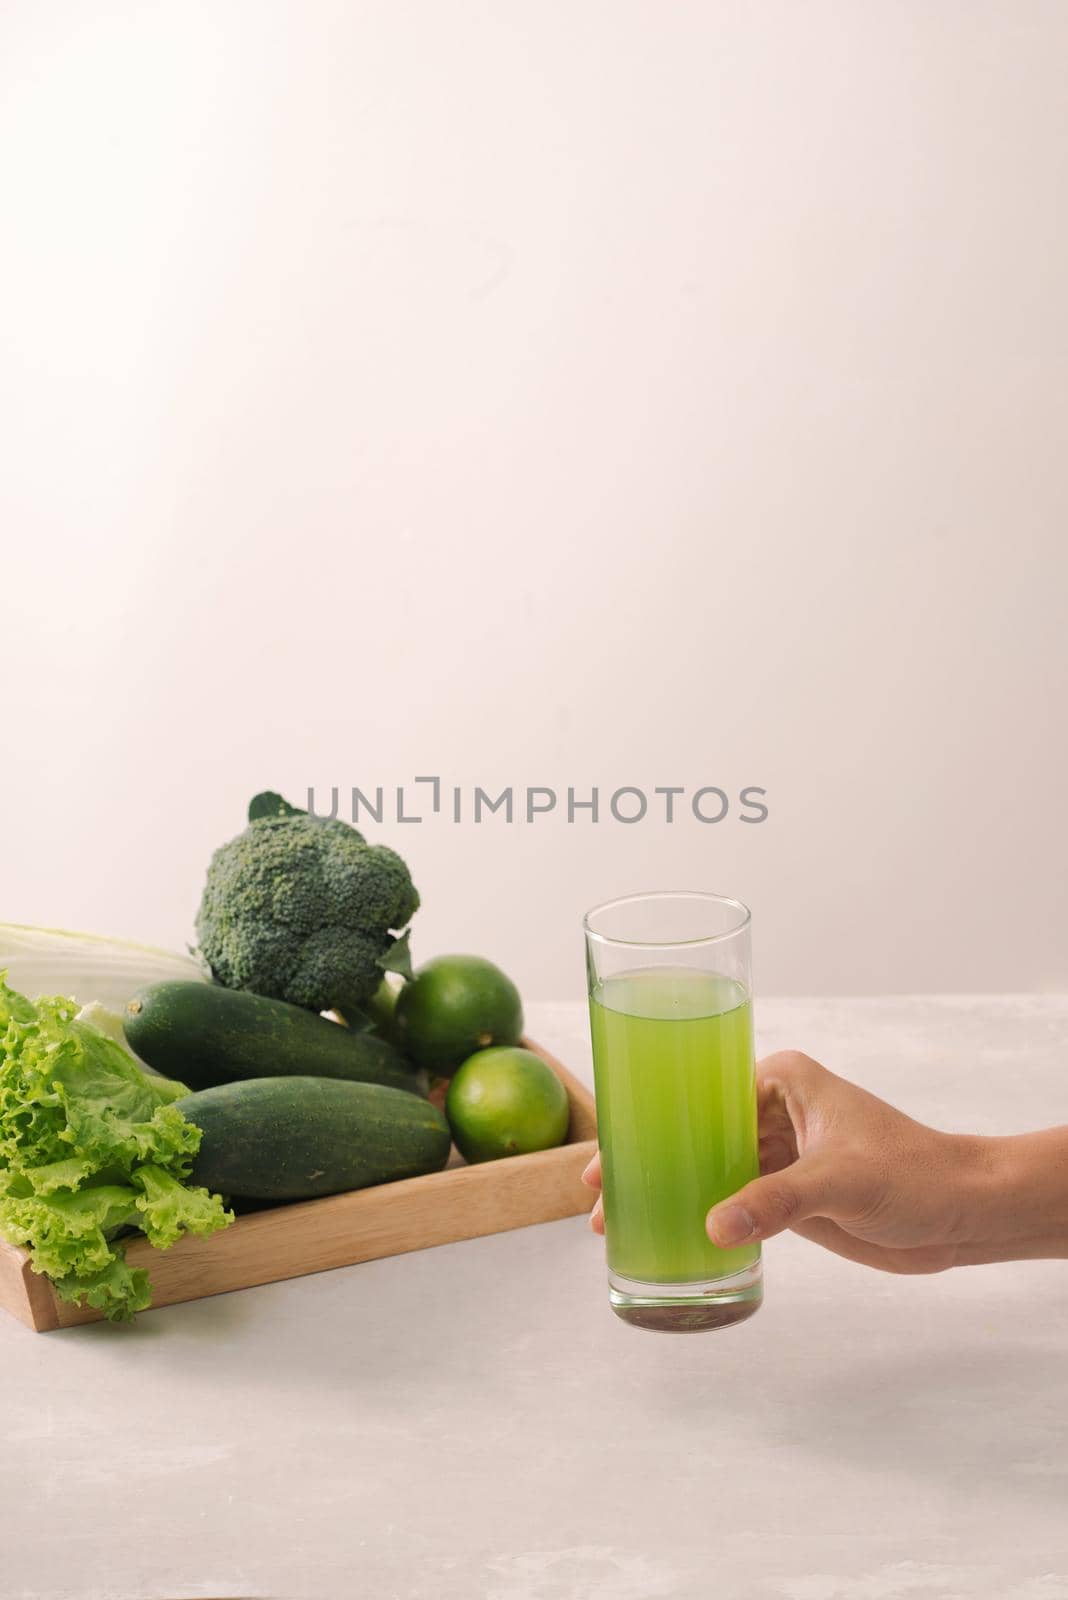 Vegan diet food. Detox drinks. Freshly squeezed juices and smoothies from vegetables. On white background, wooden tray, ingredients. Copy space by makidotvn